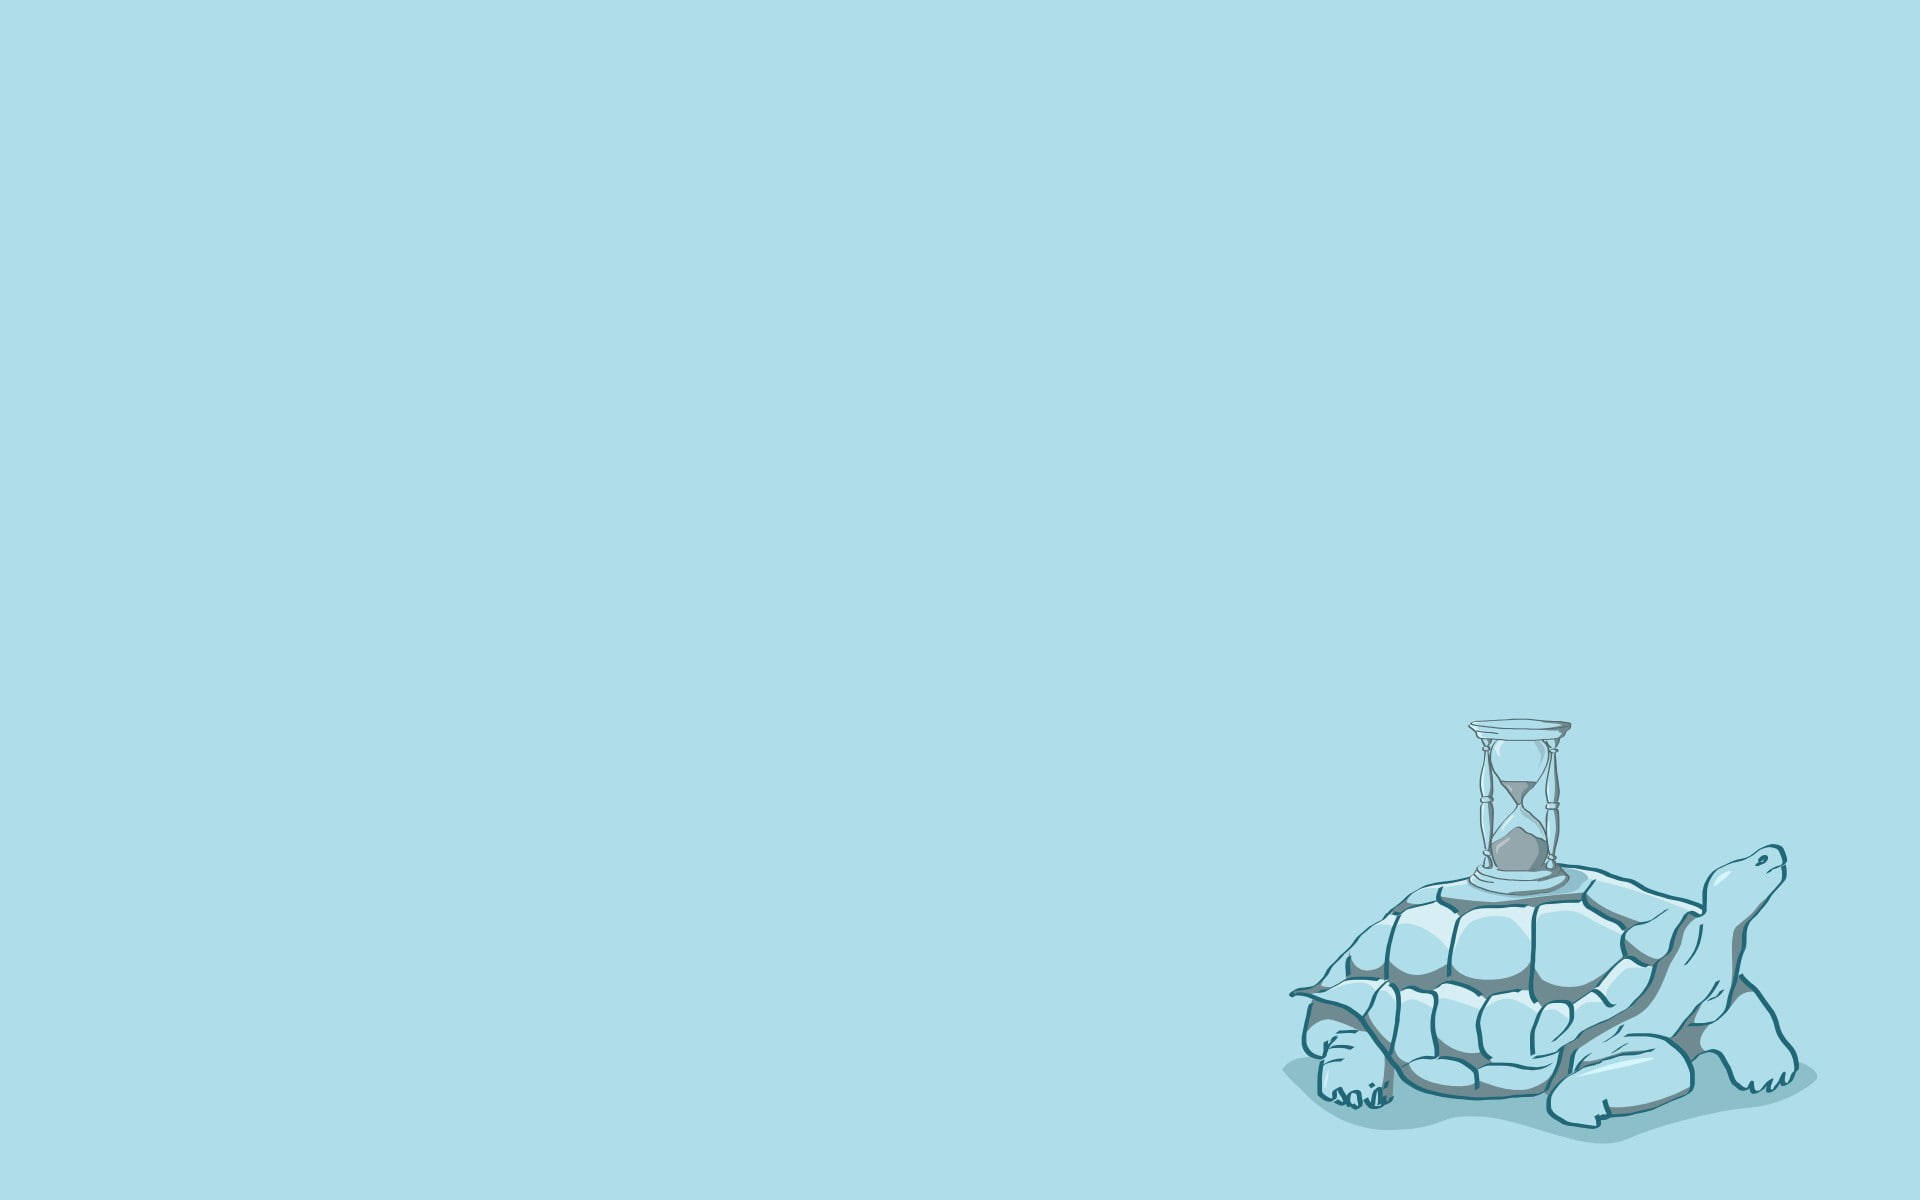 Cool Turtle Hourglass Art Background